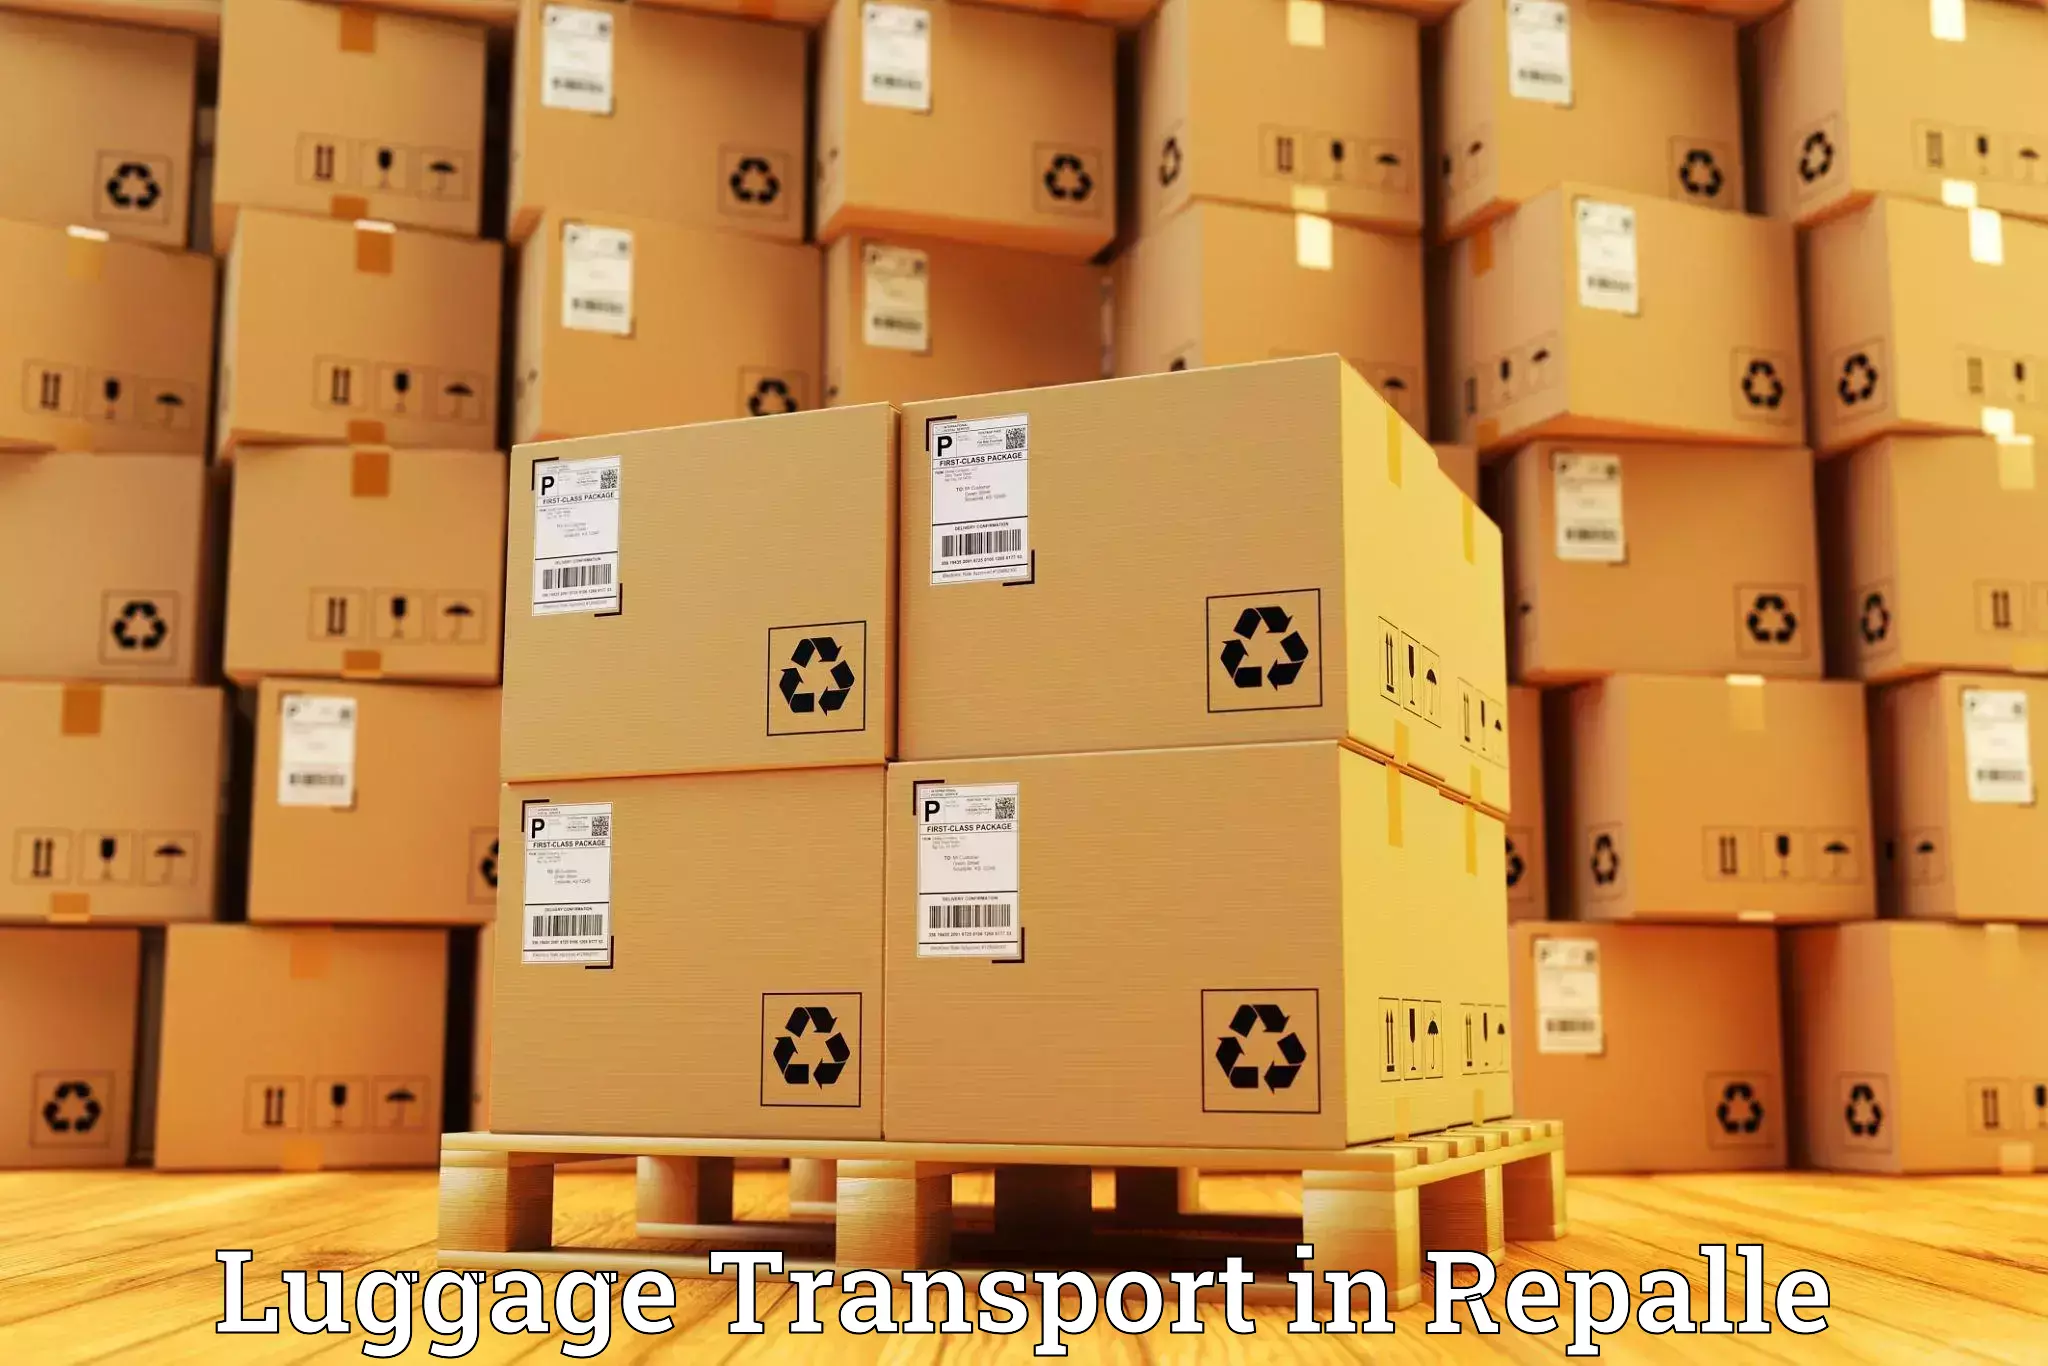 Baggage transport network in Repalle